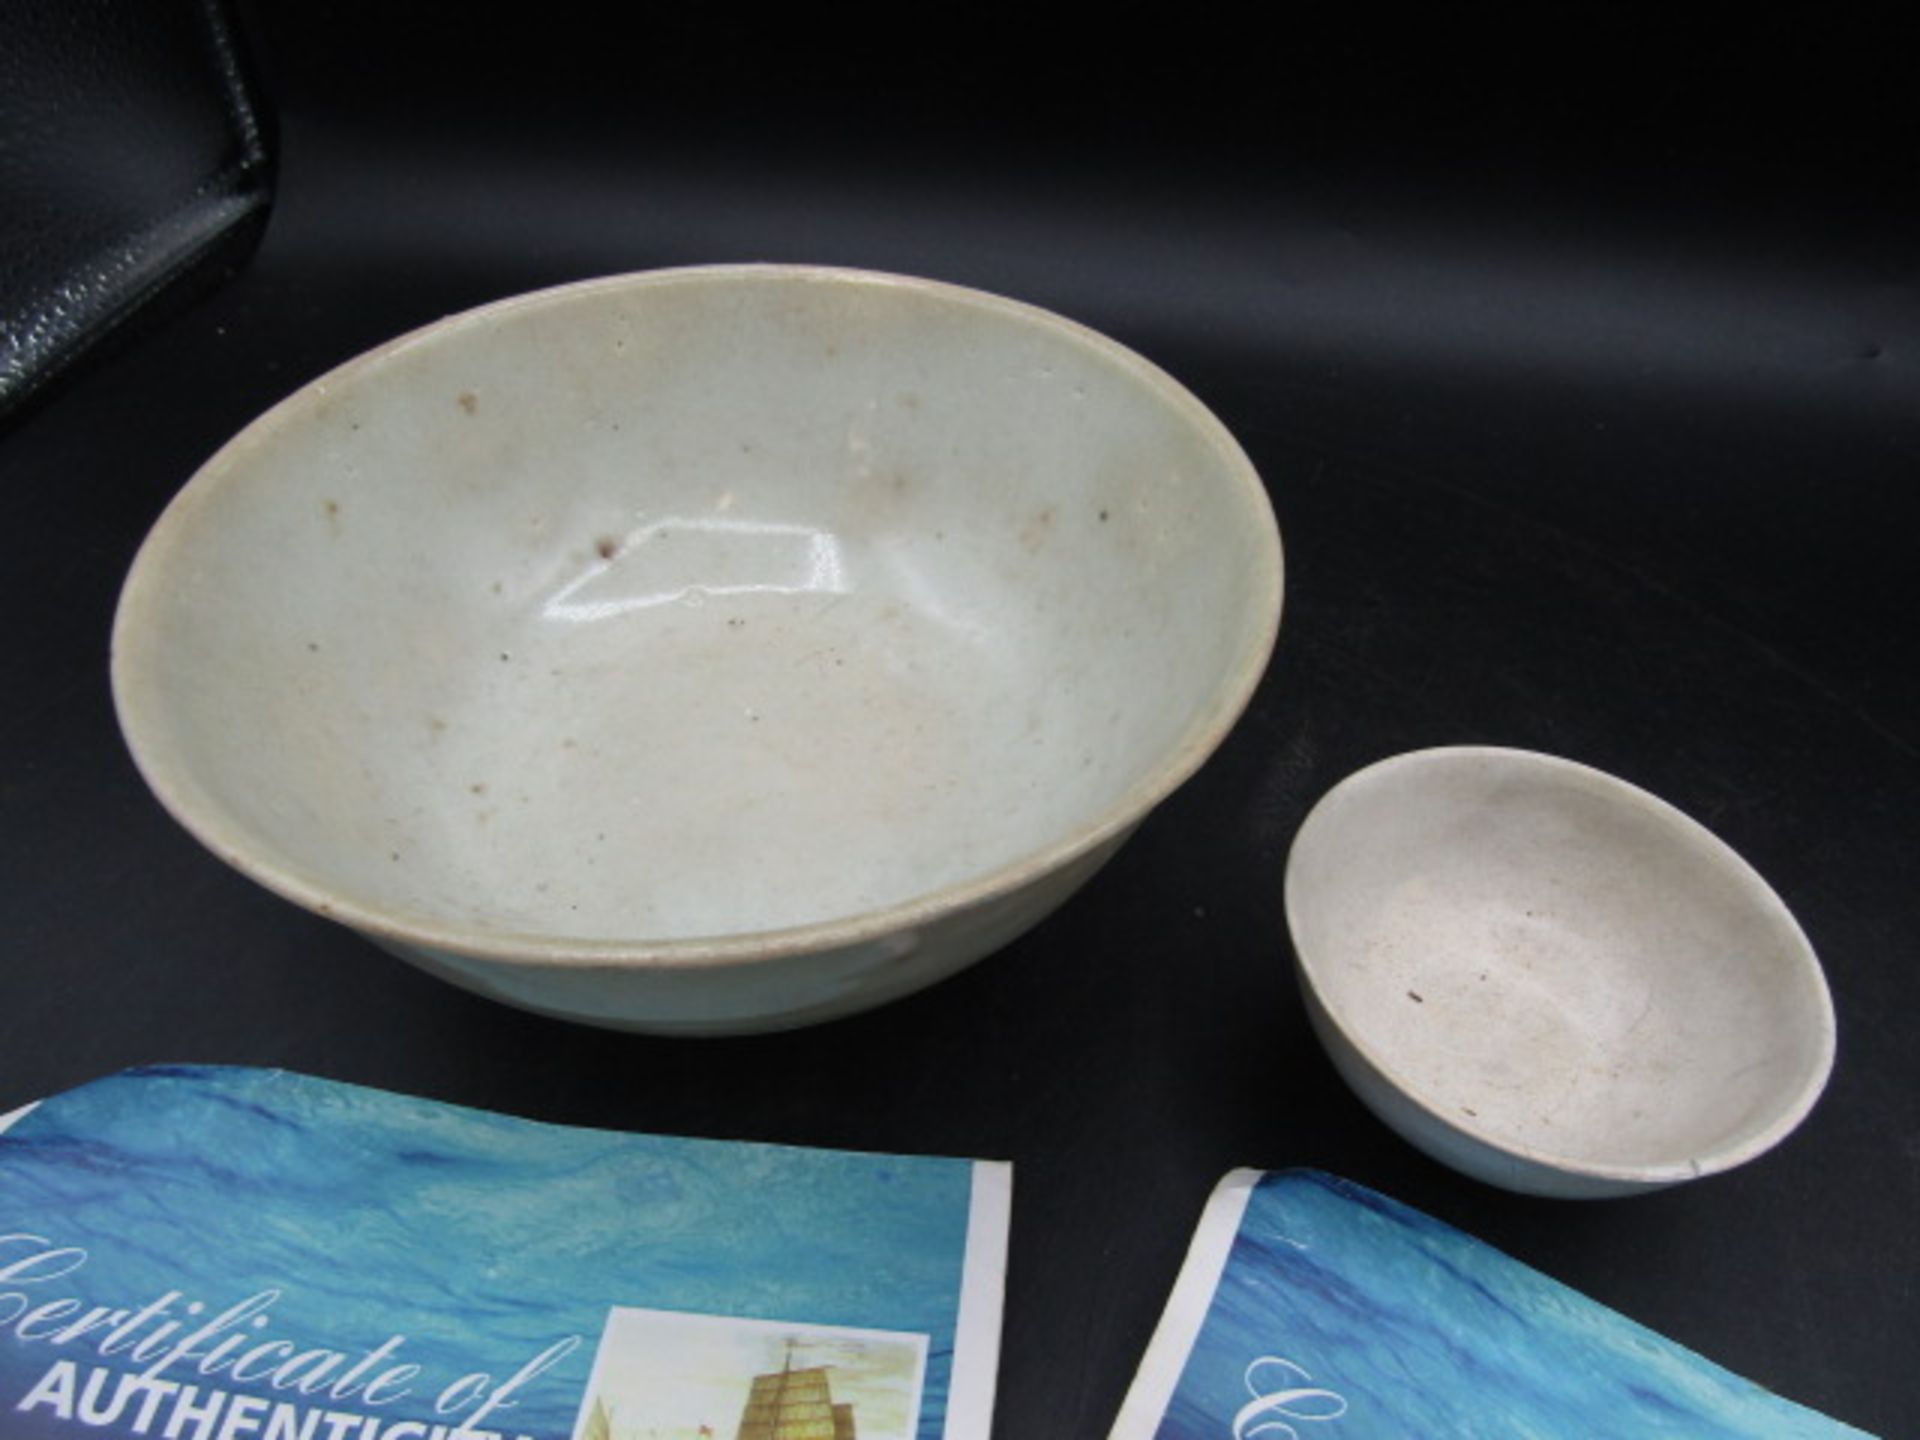 Tek Sing ship wrecked porcelain with c.o.a from the wreckage in 1822, recovered in 1999 - Image 3 of 4